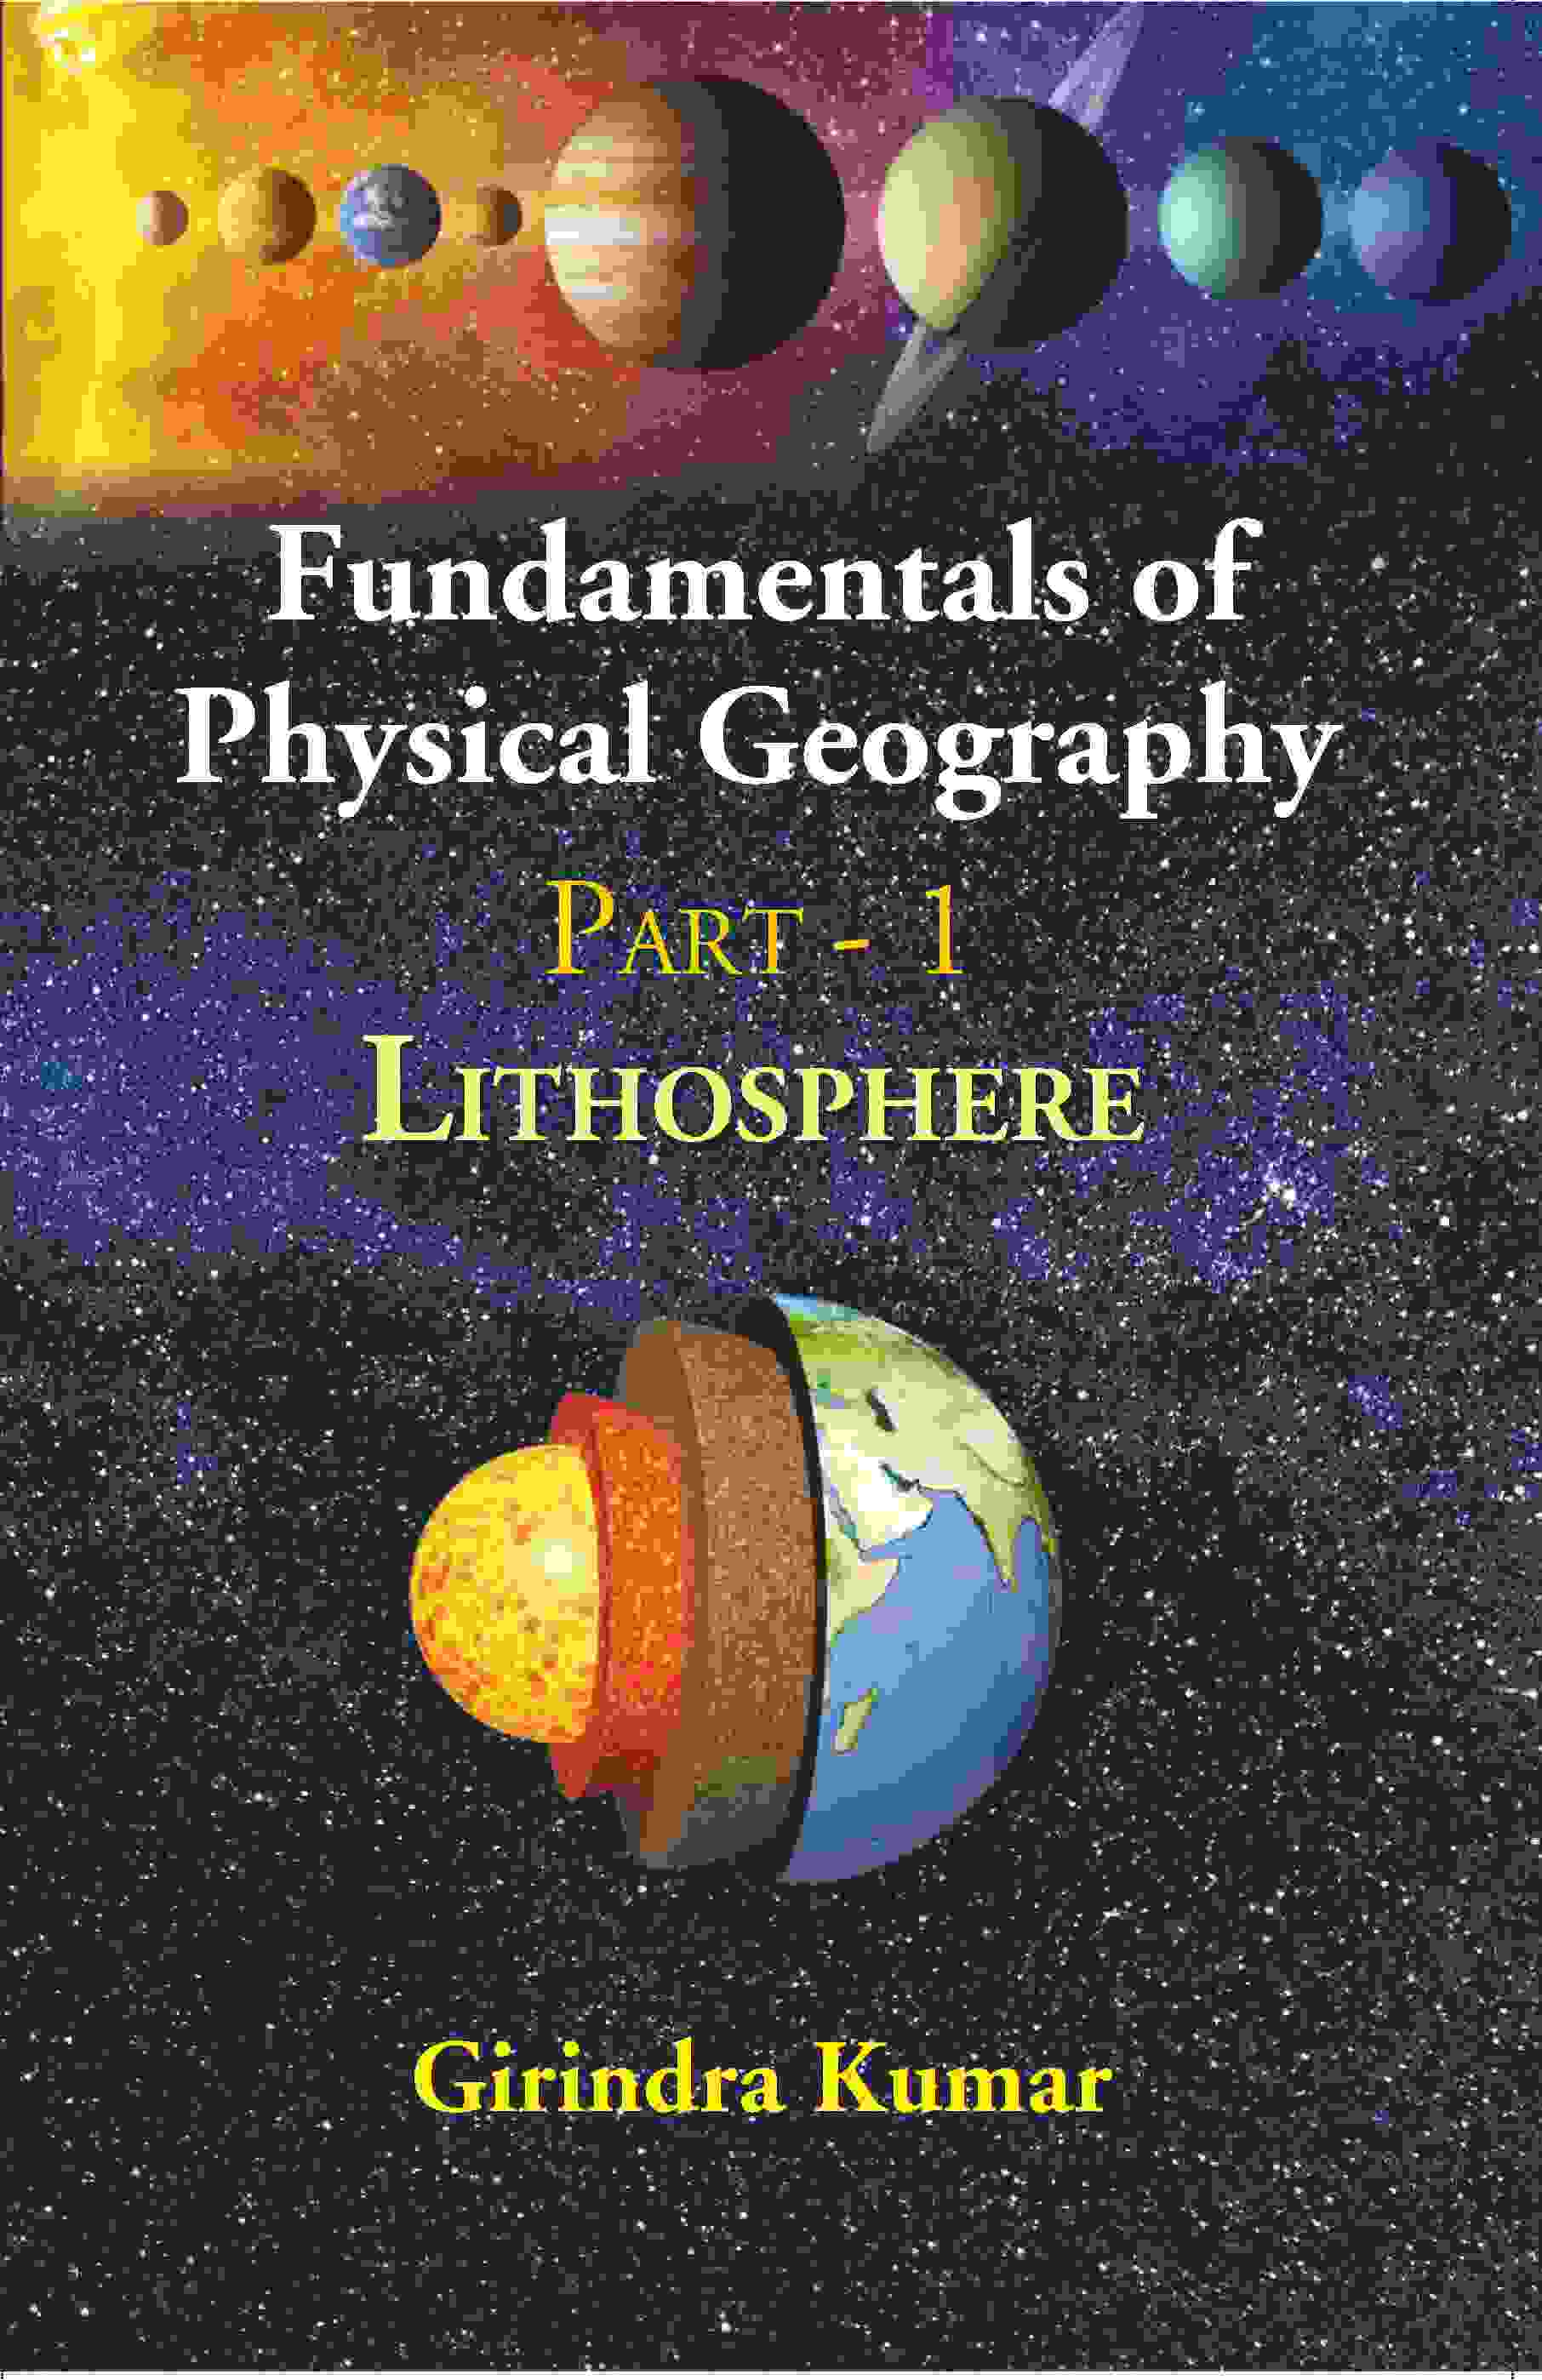 Fundamentals of Physical Geography: PART - 1 LITHOSPHERE           